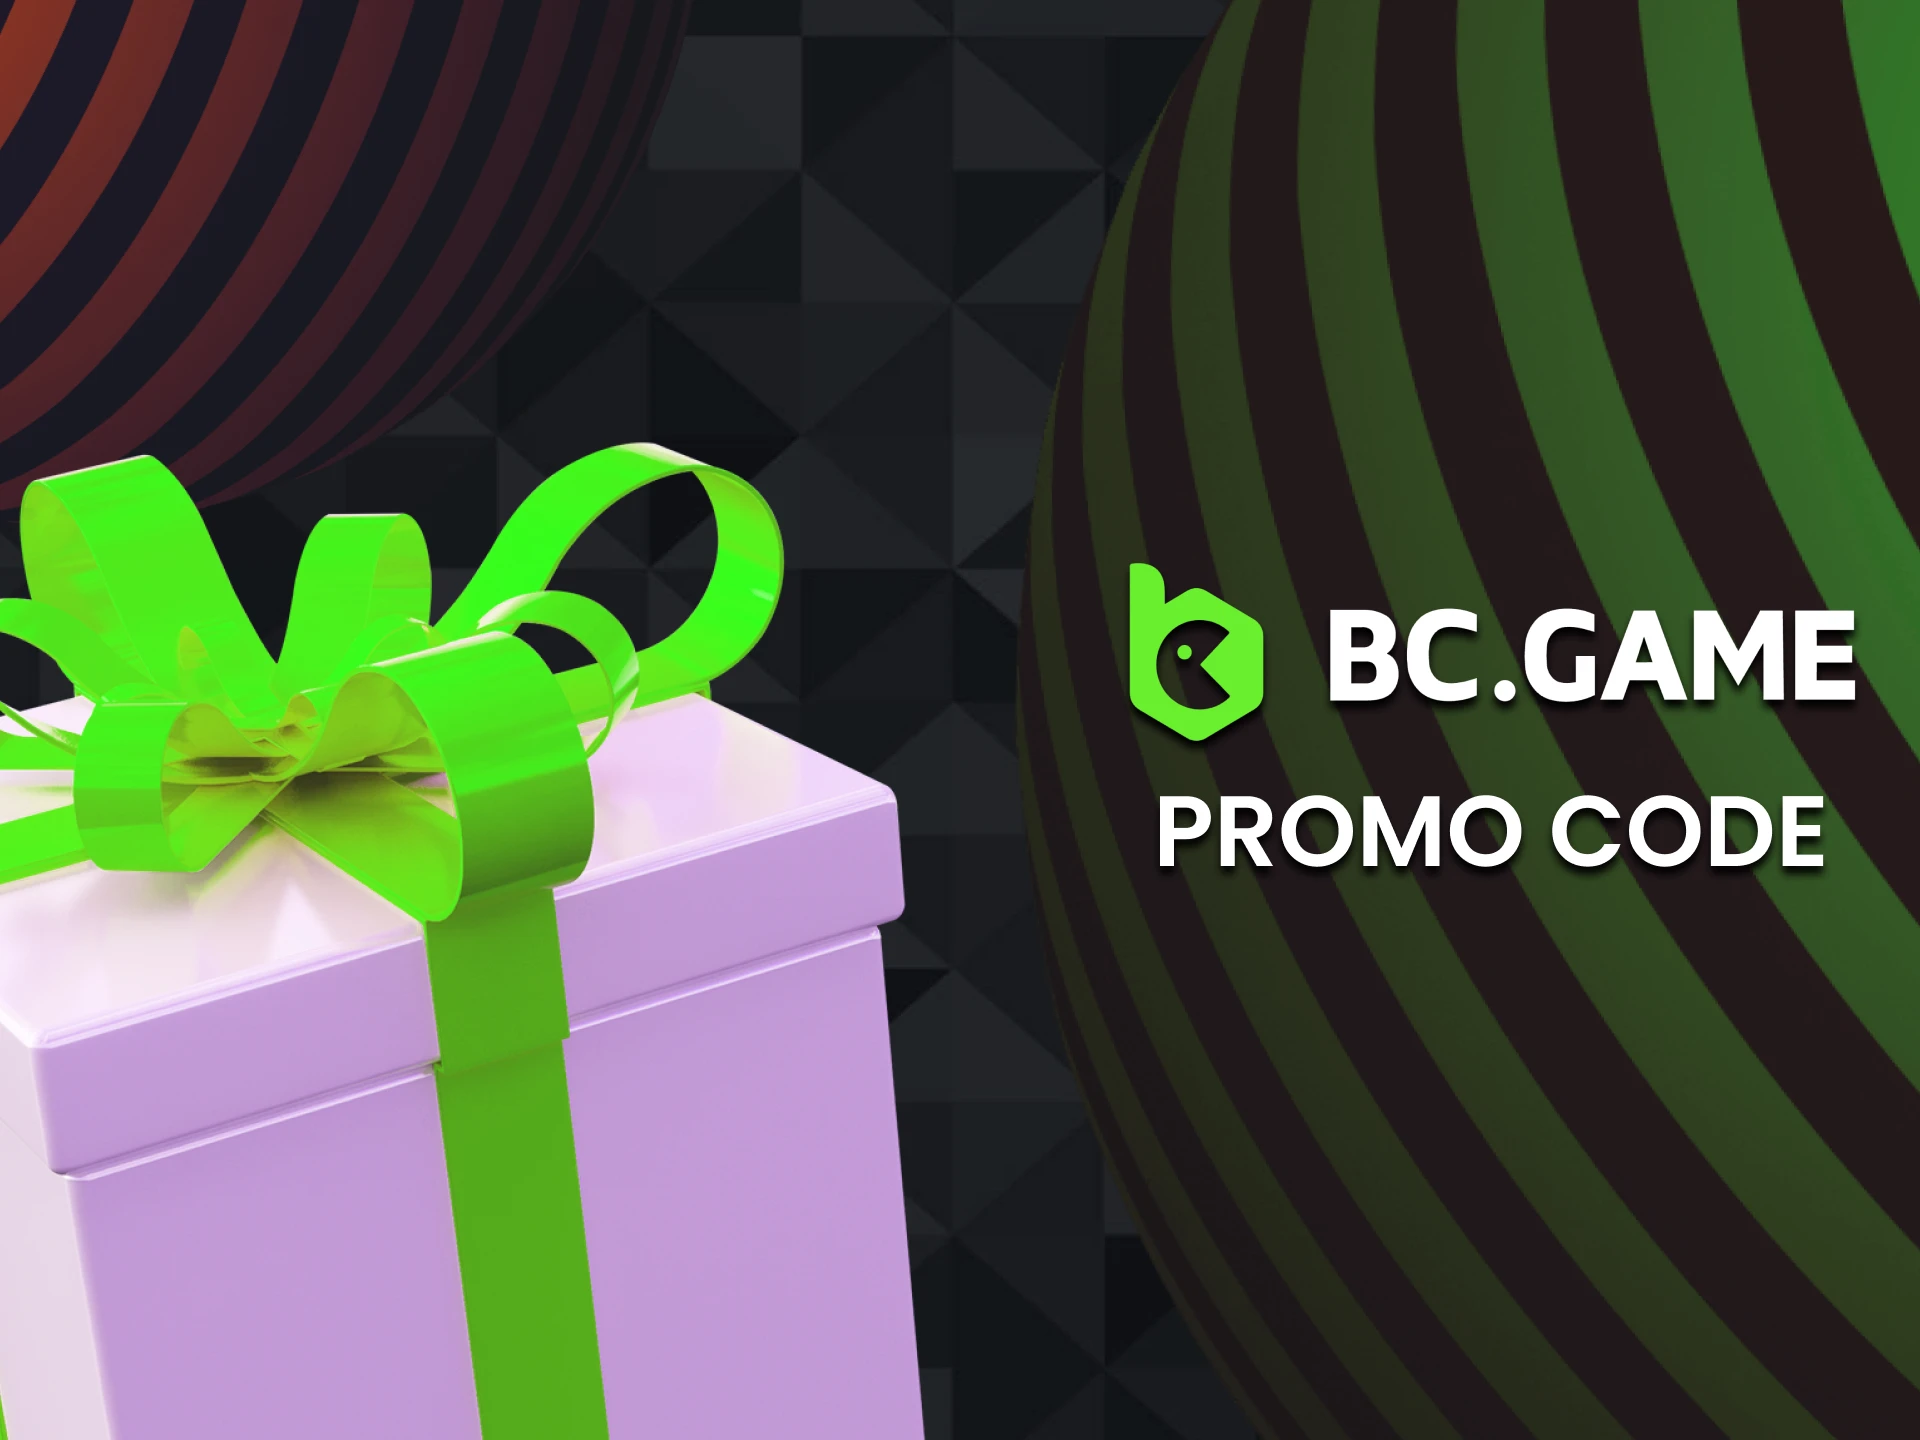 Use the BC Game promo code to increase the welcome bonus.